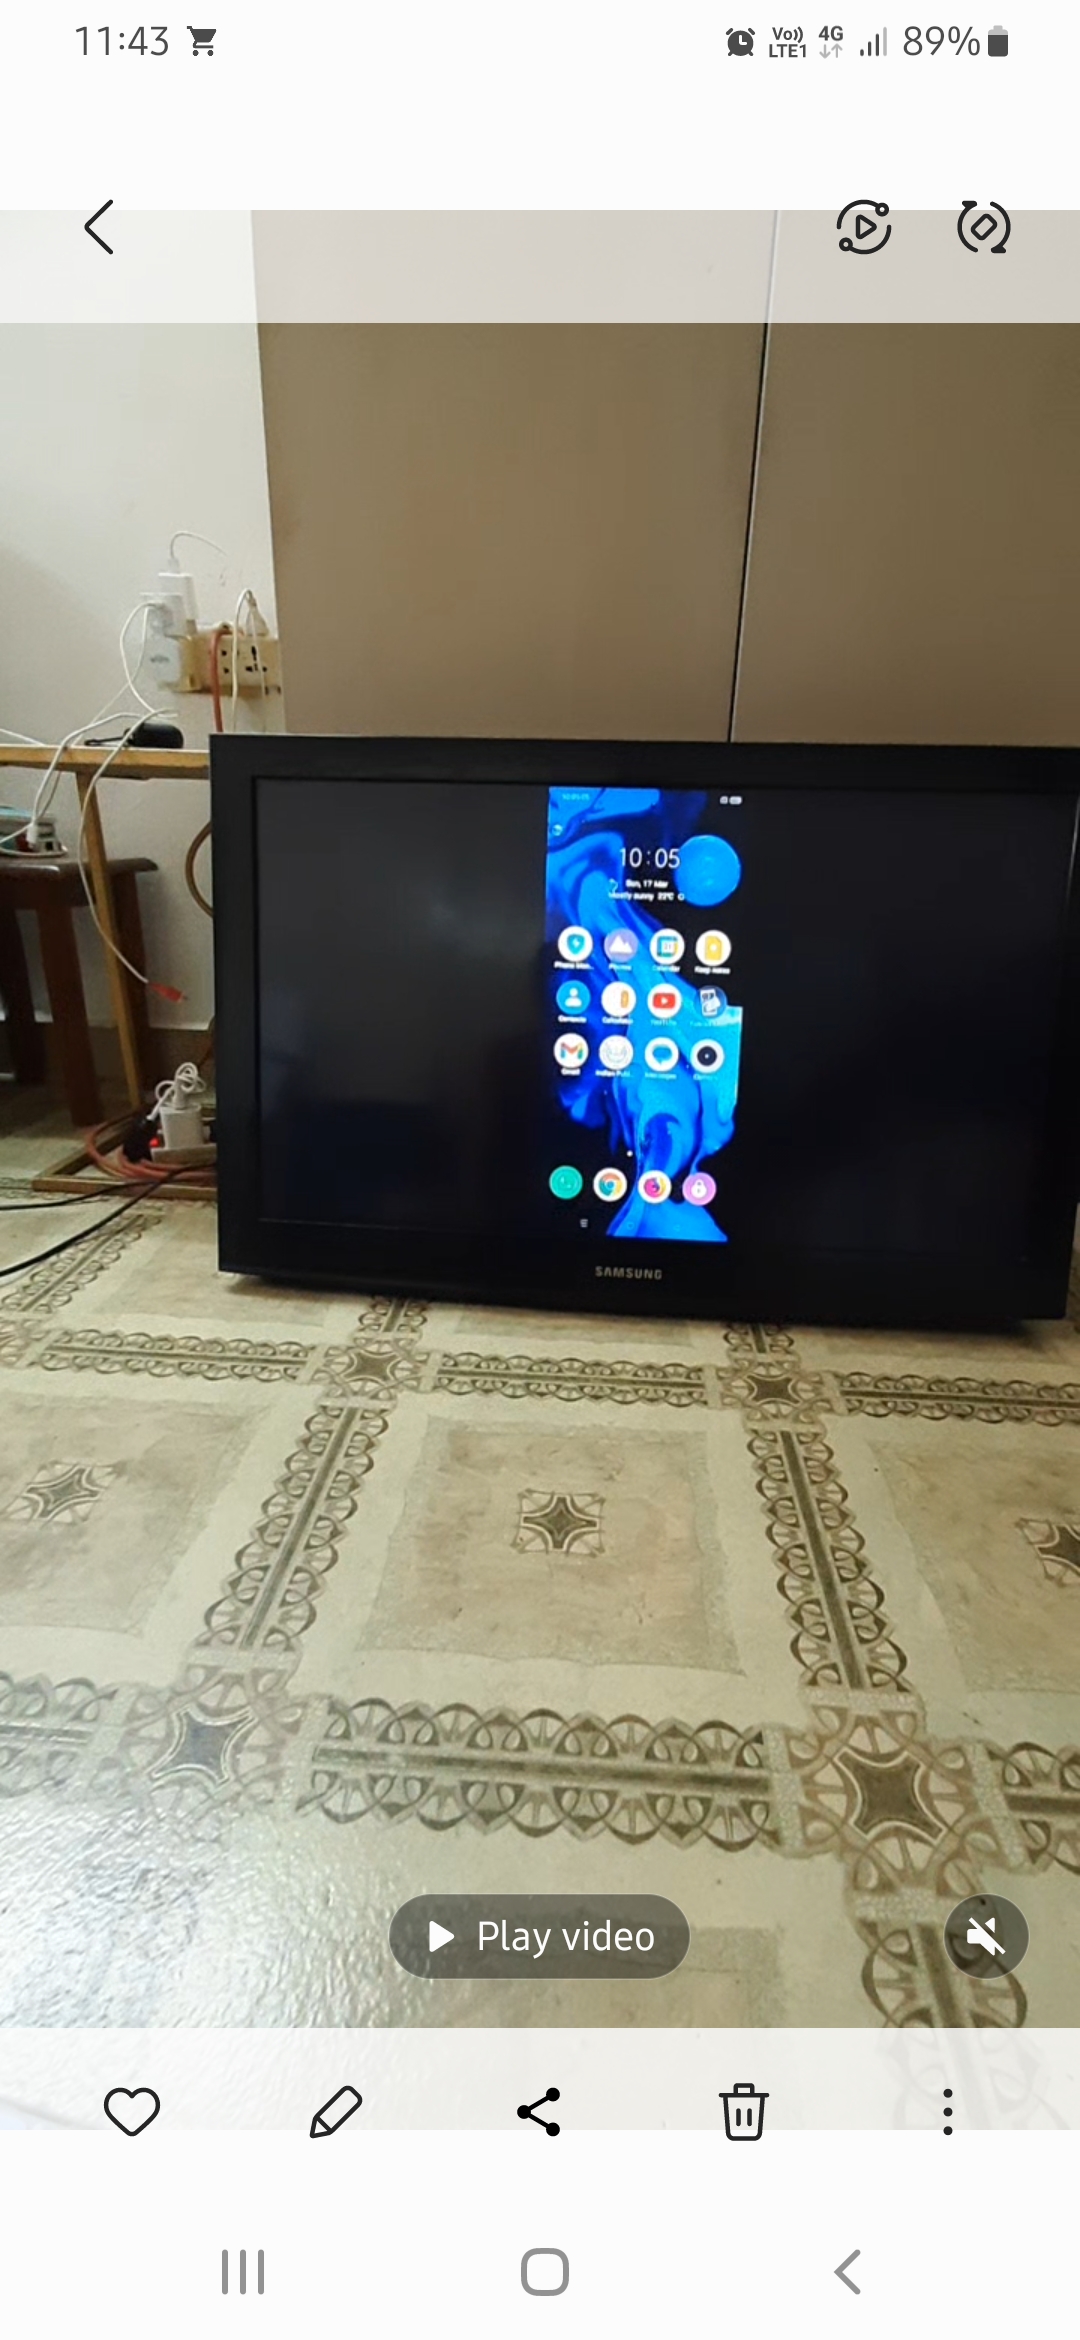 Samsung TV 32" with dongle excellent working condition. Indian leaving Kuwait for good. 